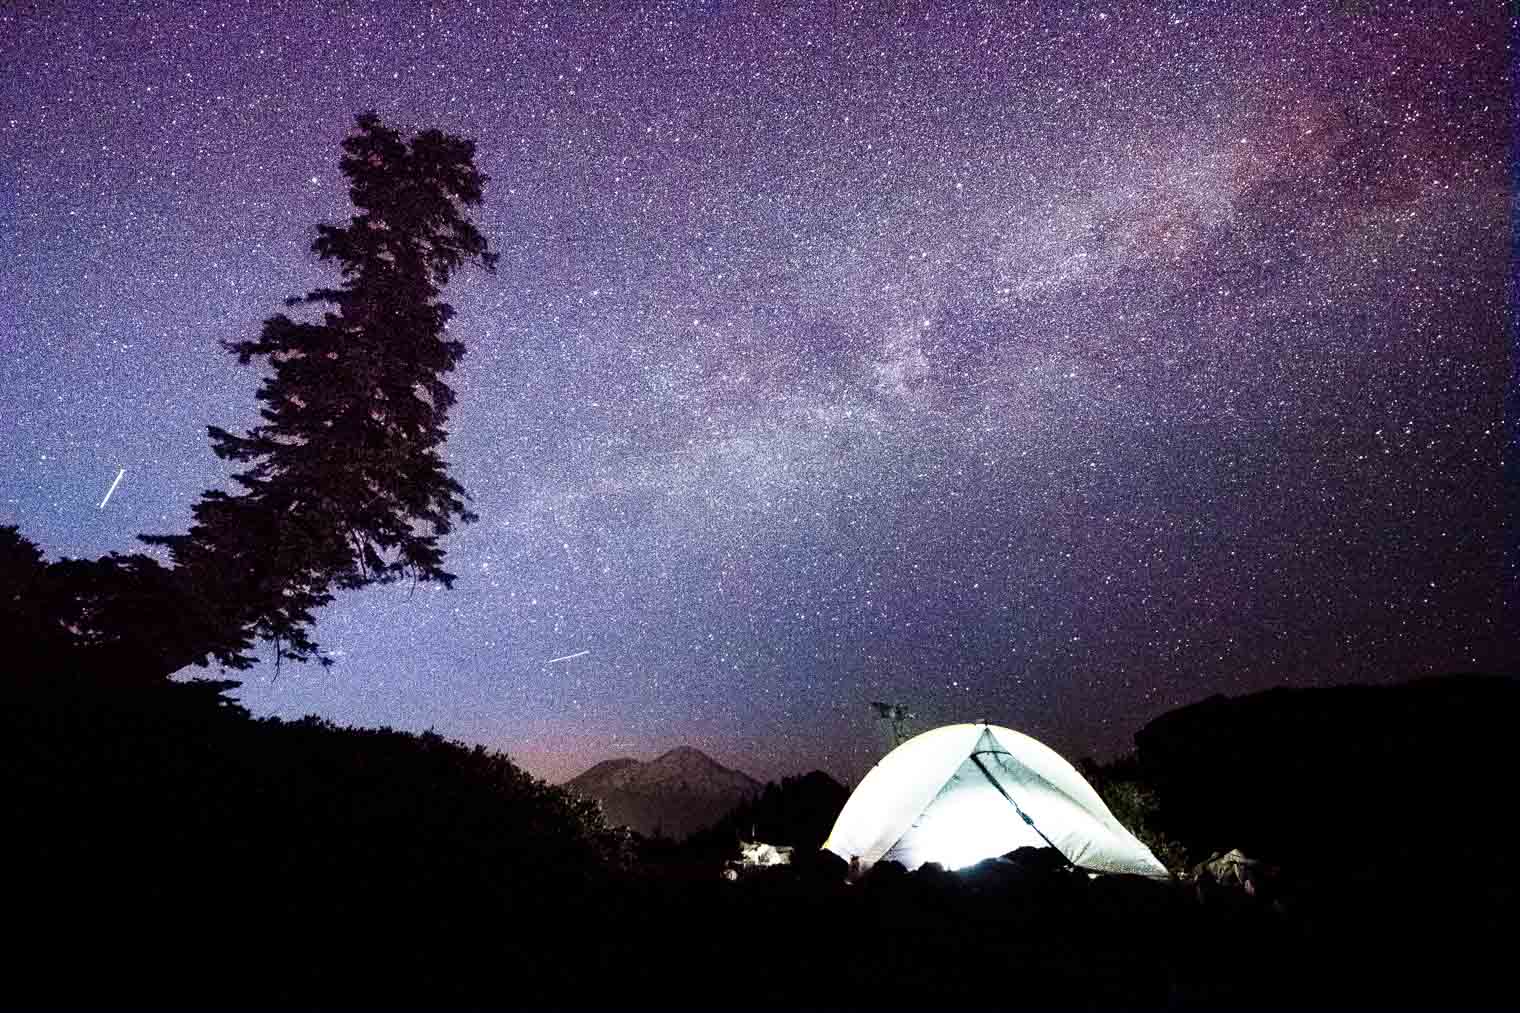 The silhouette of a tent Against a starry sky